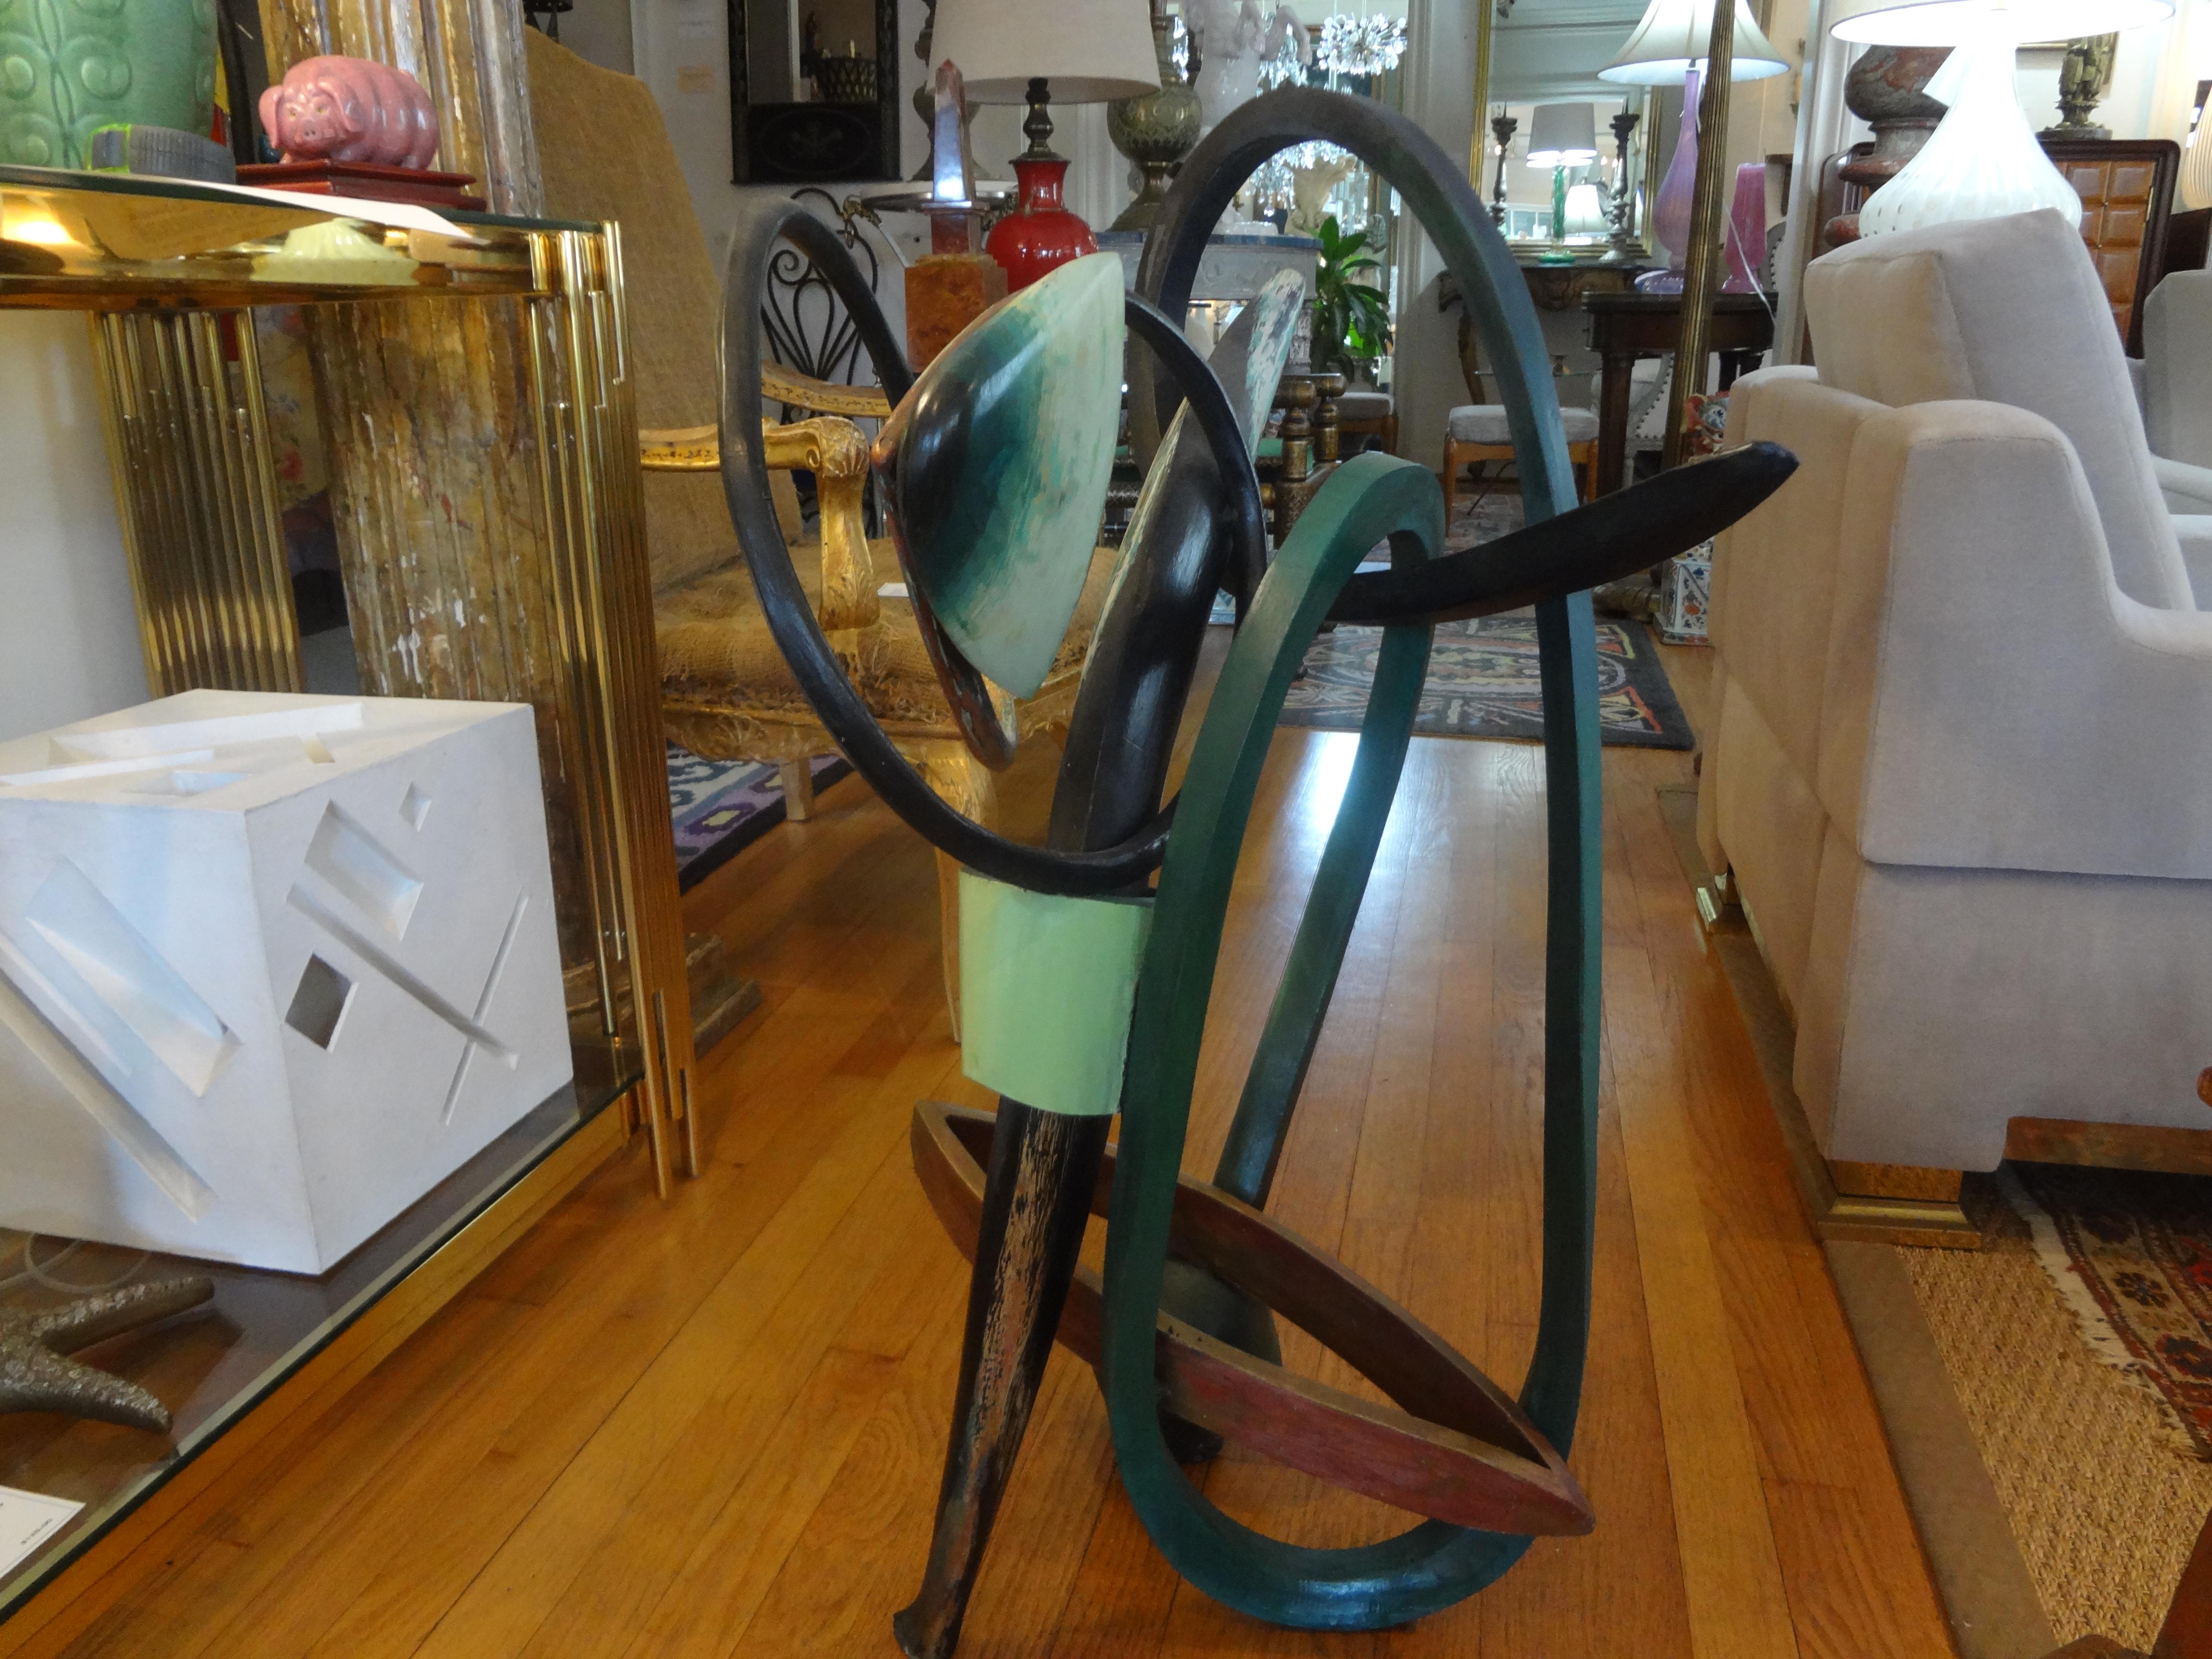 Stunning large modernist bentwood abstract sculpture. This gorgeous Mid-Century Modern abstract sculpture is polychrome decorated and interesting from every angle. Would look great displayed on a pedestal, console table or cocktail table.